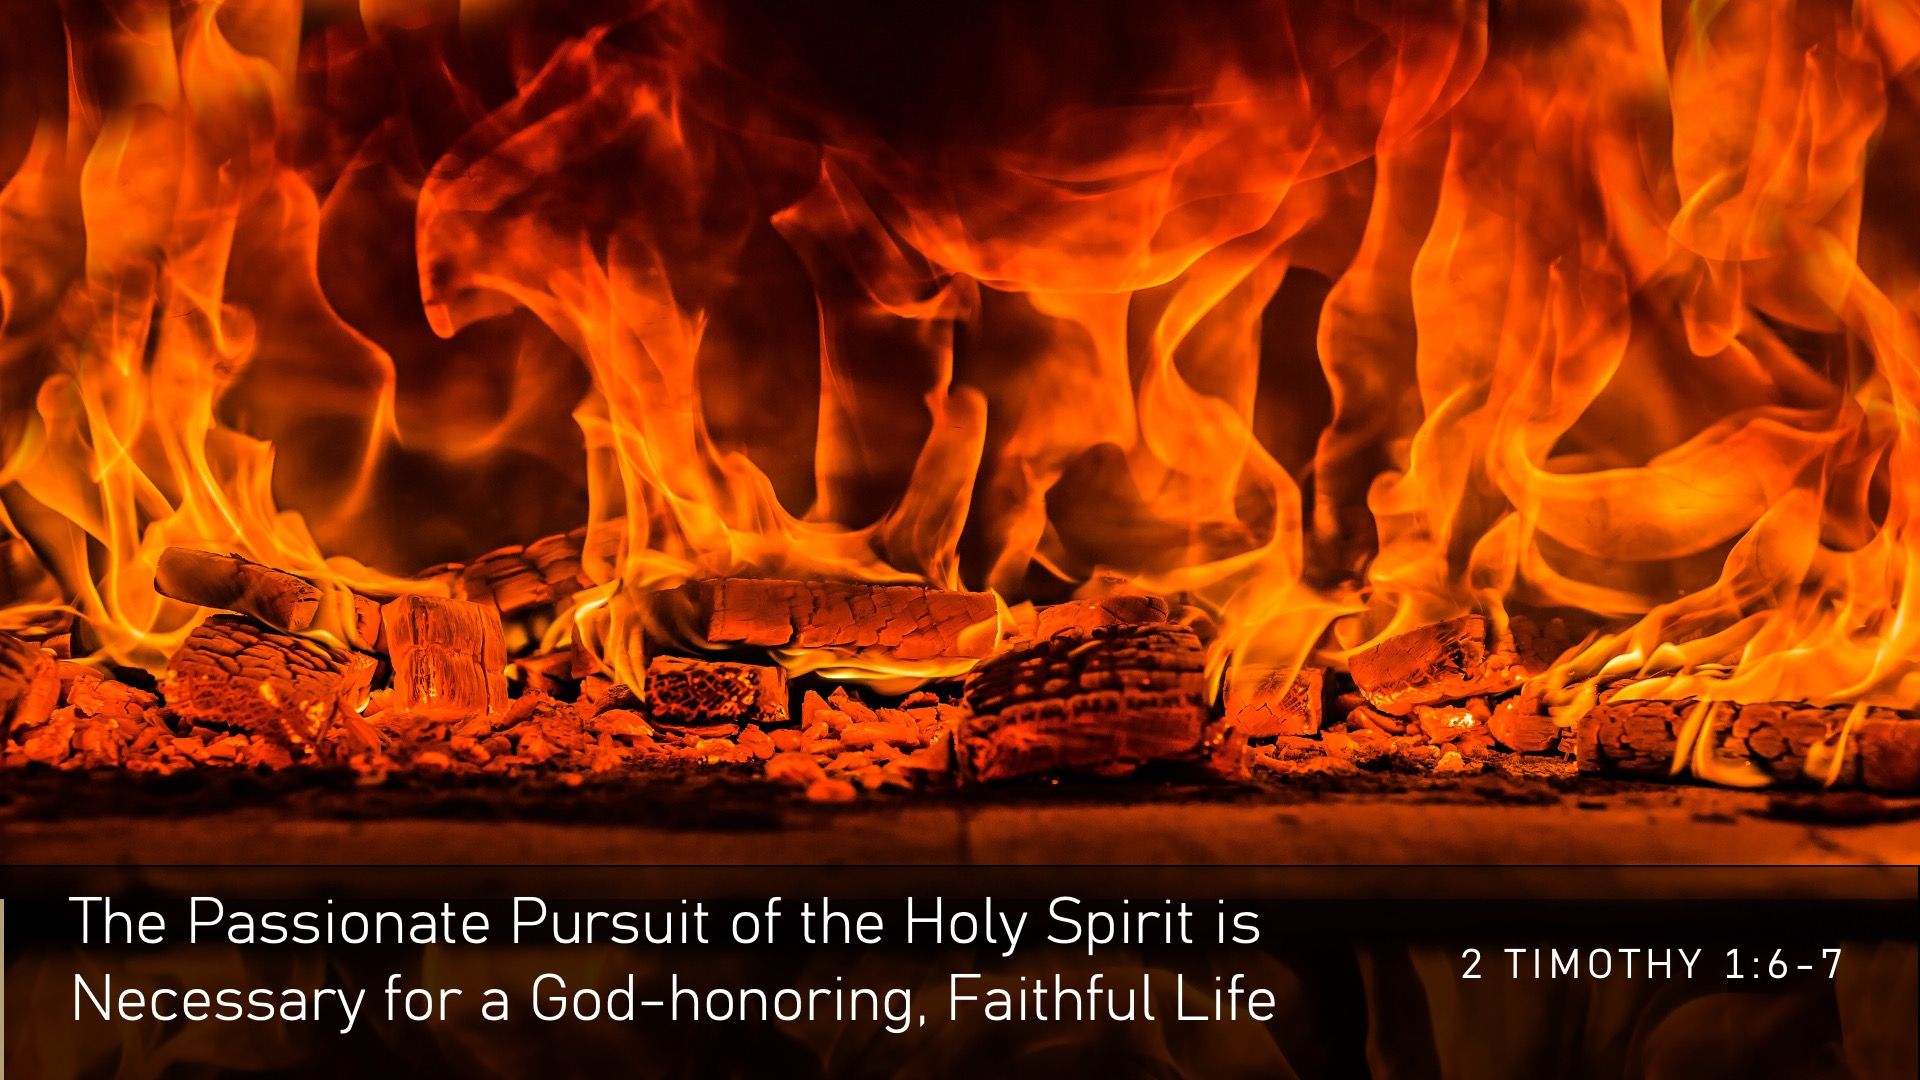 The Passionate Pursuit of the Holy Spirit is Necessary for a God-honoring, Faithful Life